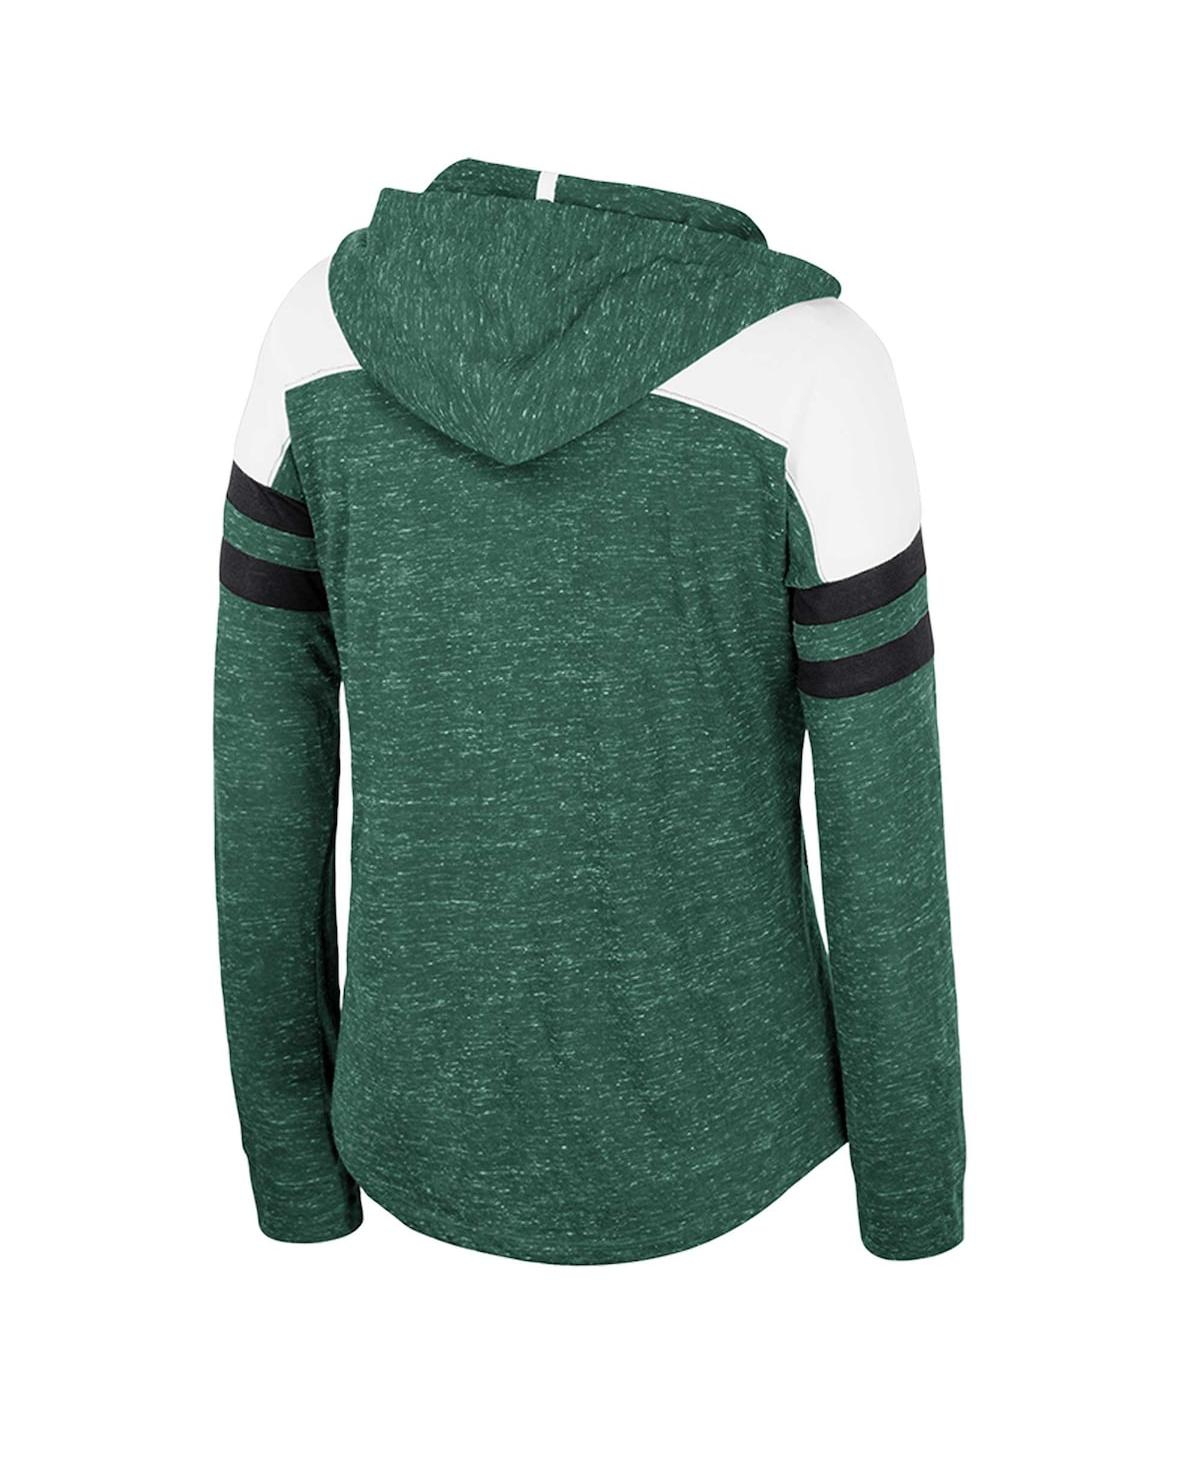 Shop Colosseum Women's  Green Distressed Michigan State Spartans Speckled Color Block Long Sleeve Hooded T